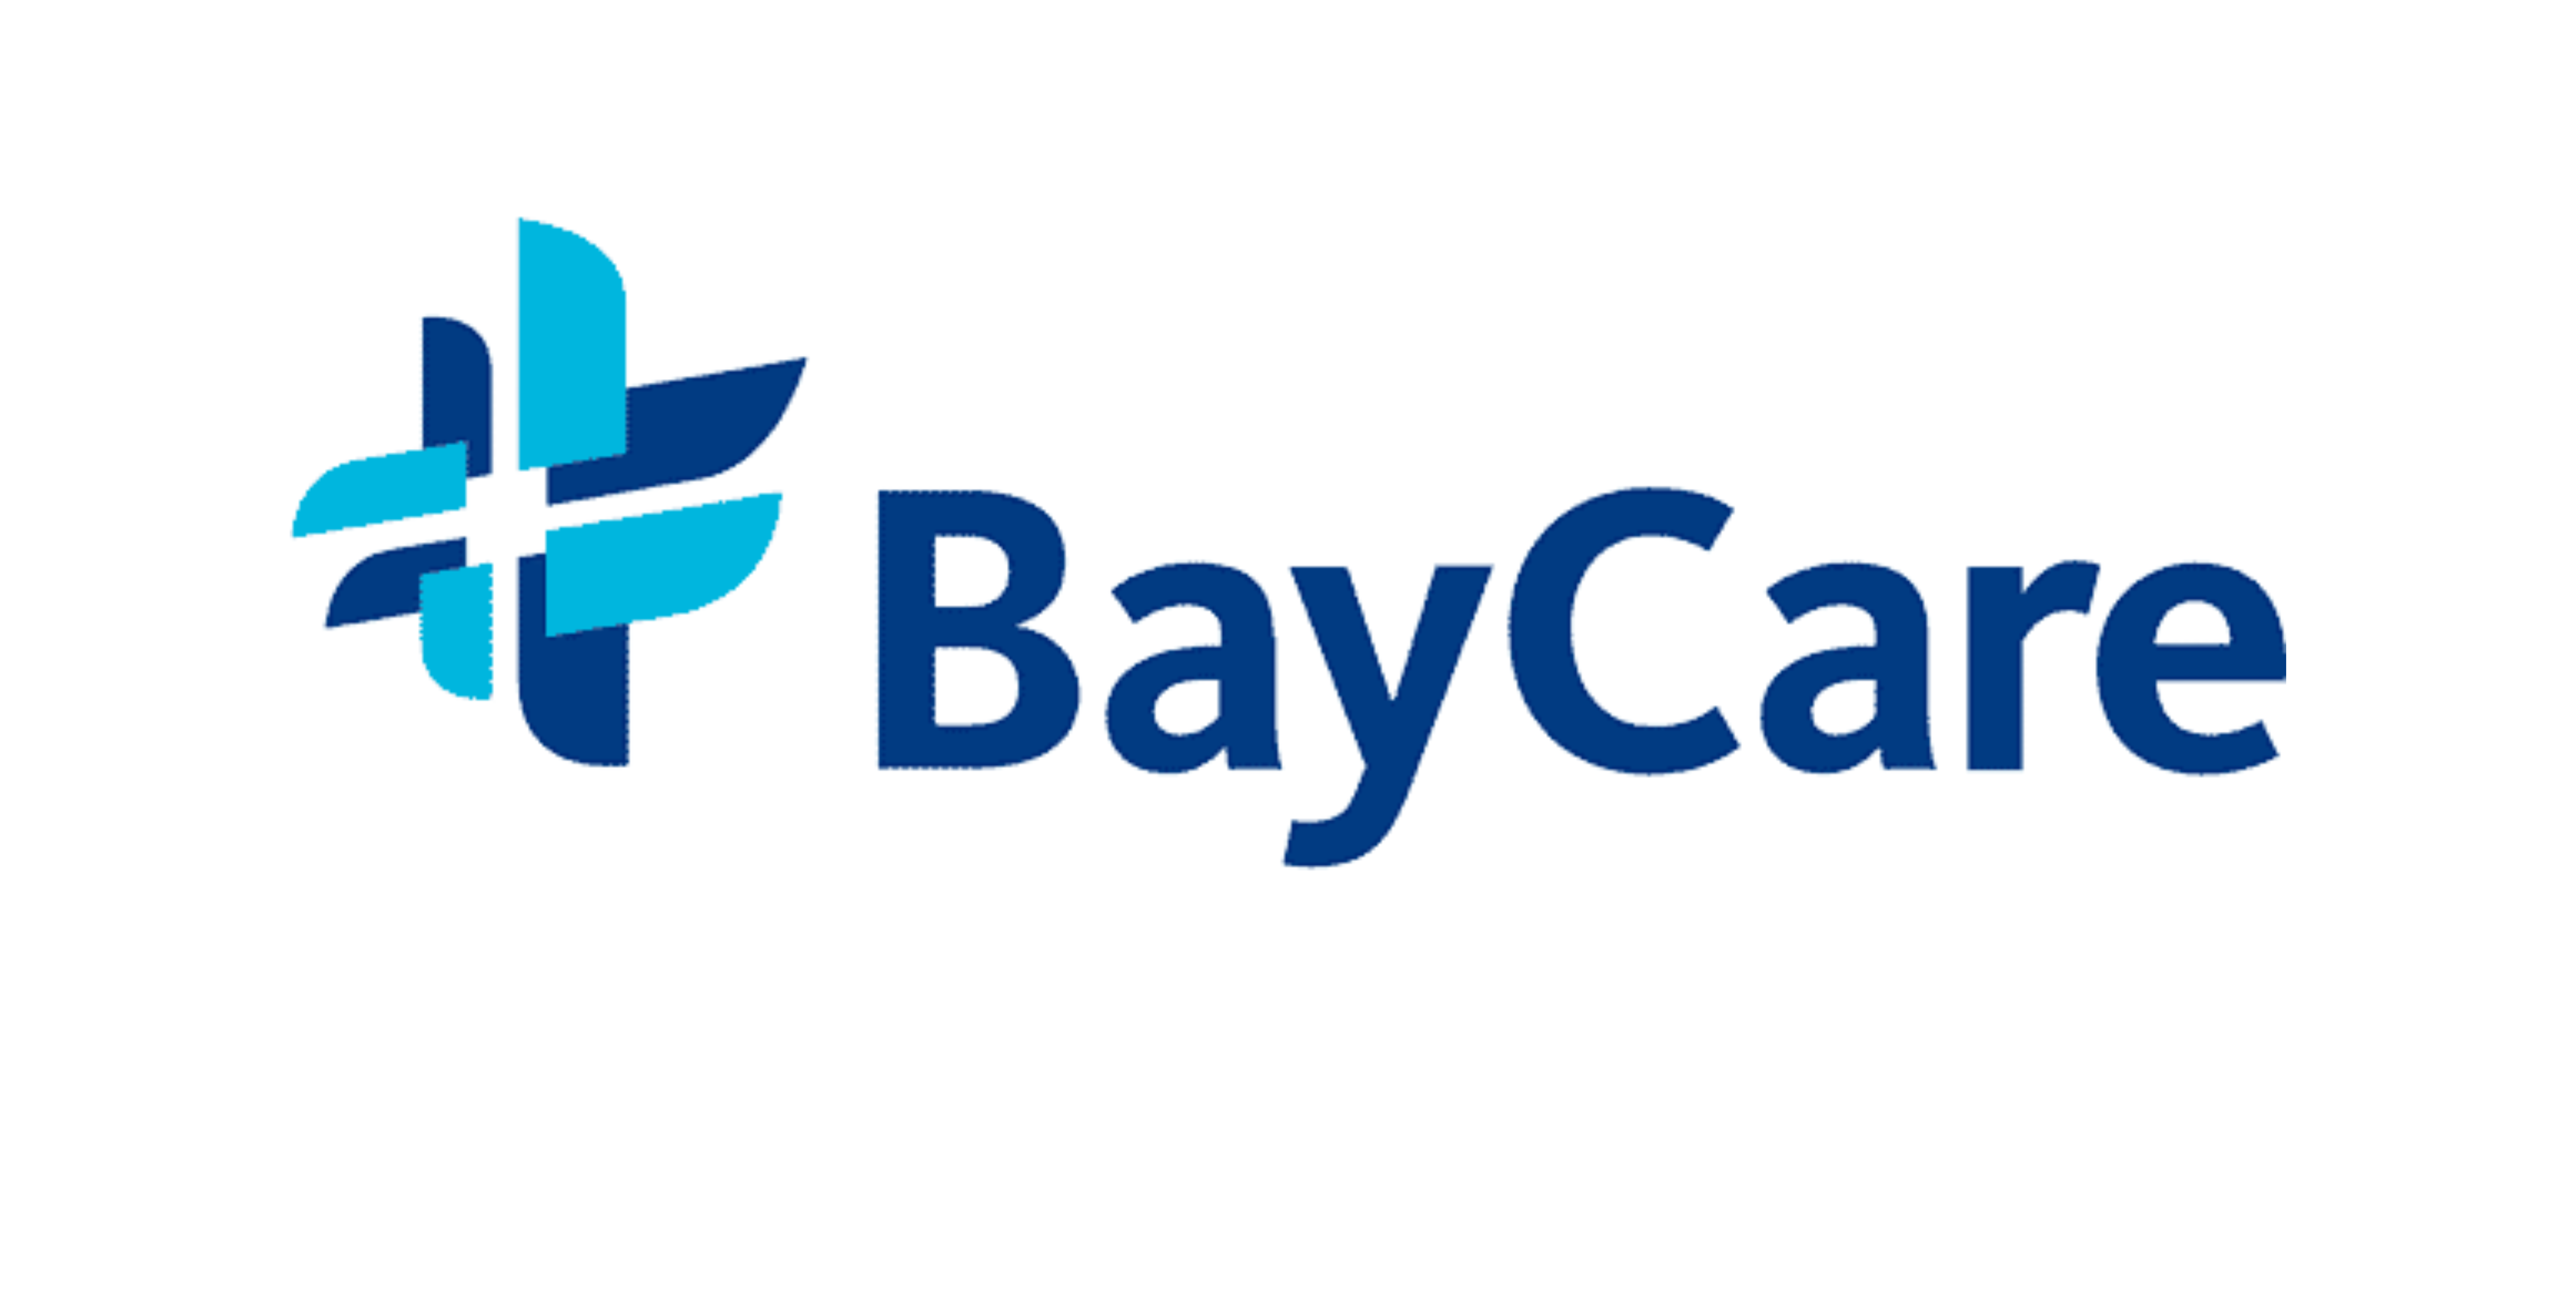 BayCare Health System’s Amy Wyrick and Stephanie Clemson discuss the development and success of their BayCare Canine Cam video series on Facebook